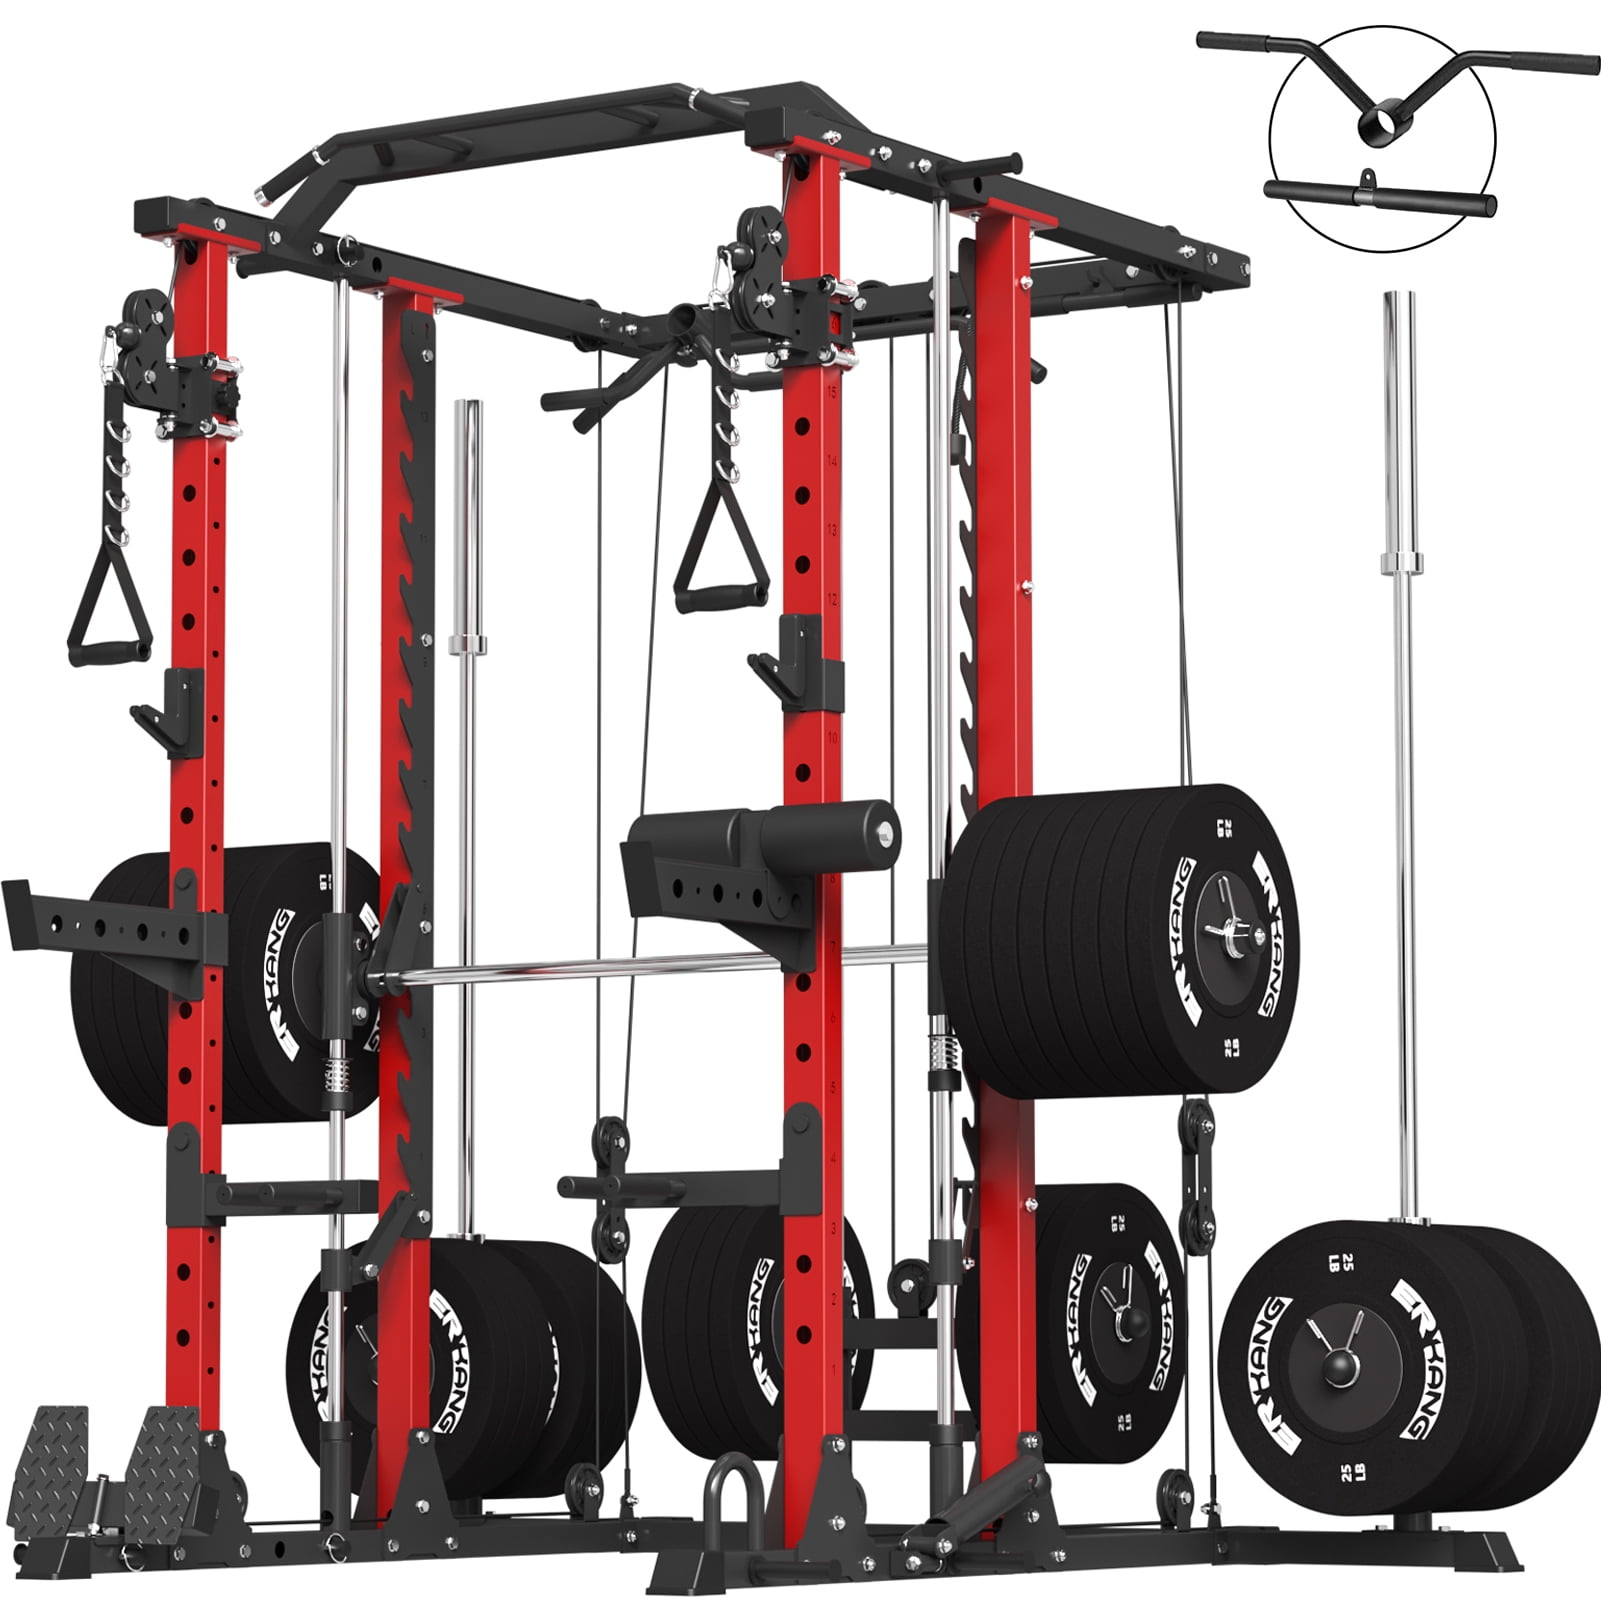 ER KANG Smith Machine Home Gym, 2000LBS Squat Rack with Cable Crossover System, Multi-Function Workout Machine for Home Gym(2023 Version)